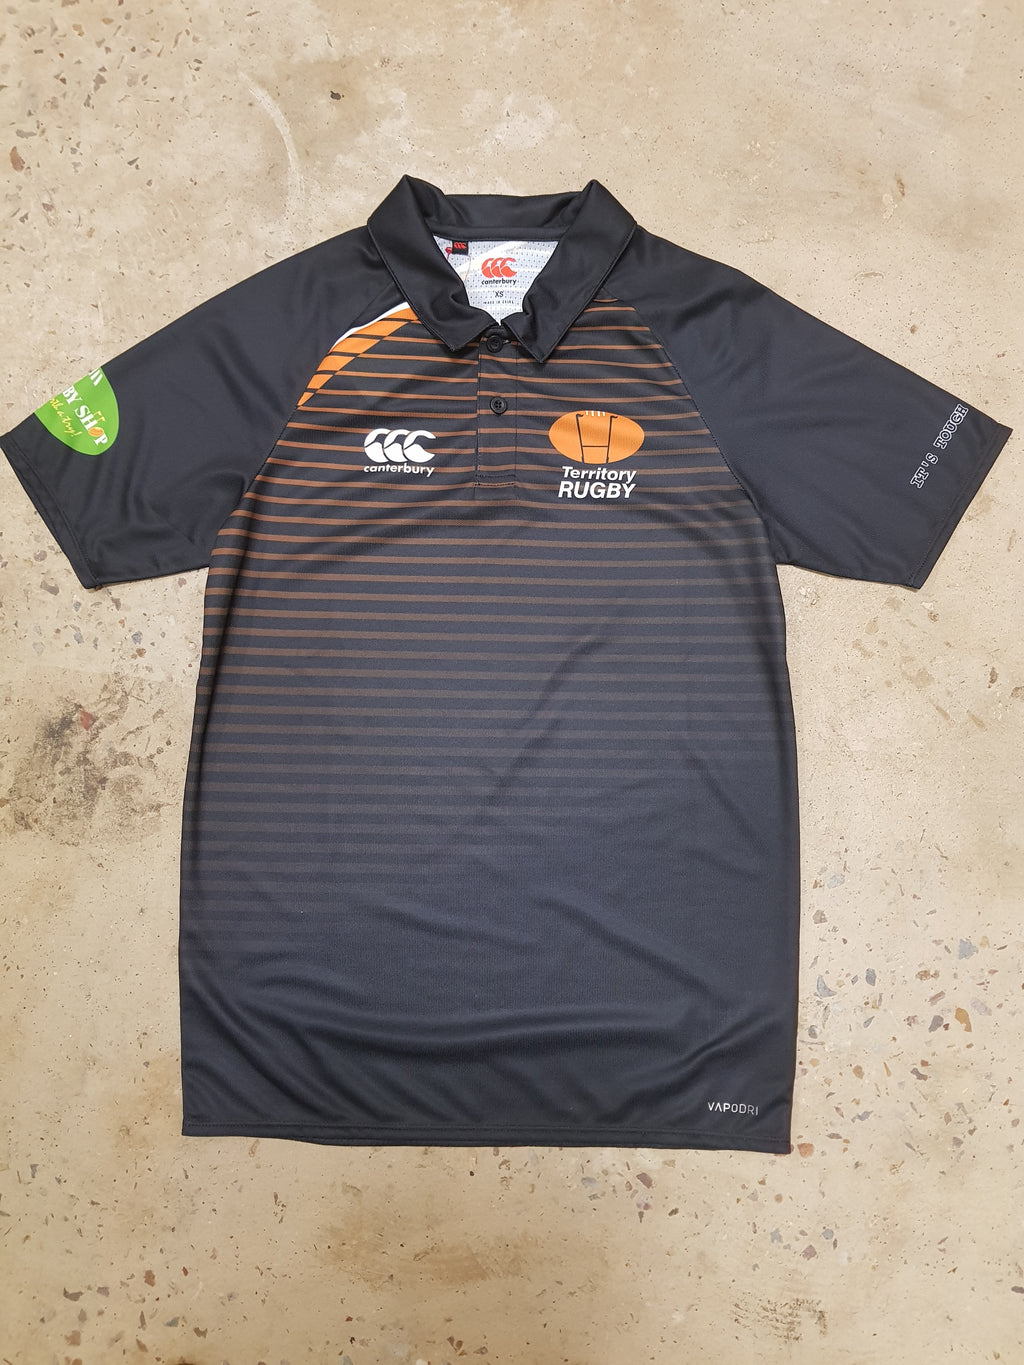 Territory Rugby Supporters Polo - The Rugby Shop Darwin